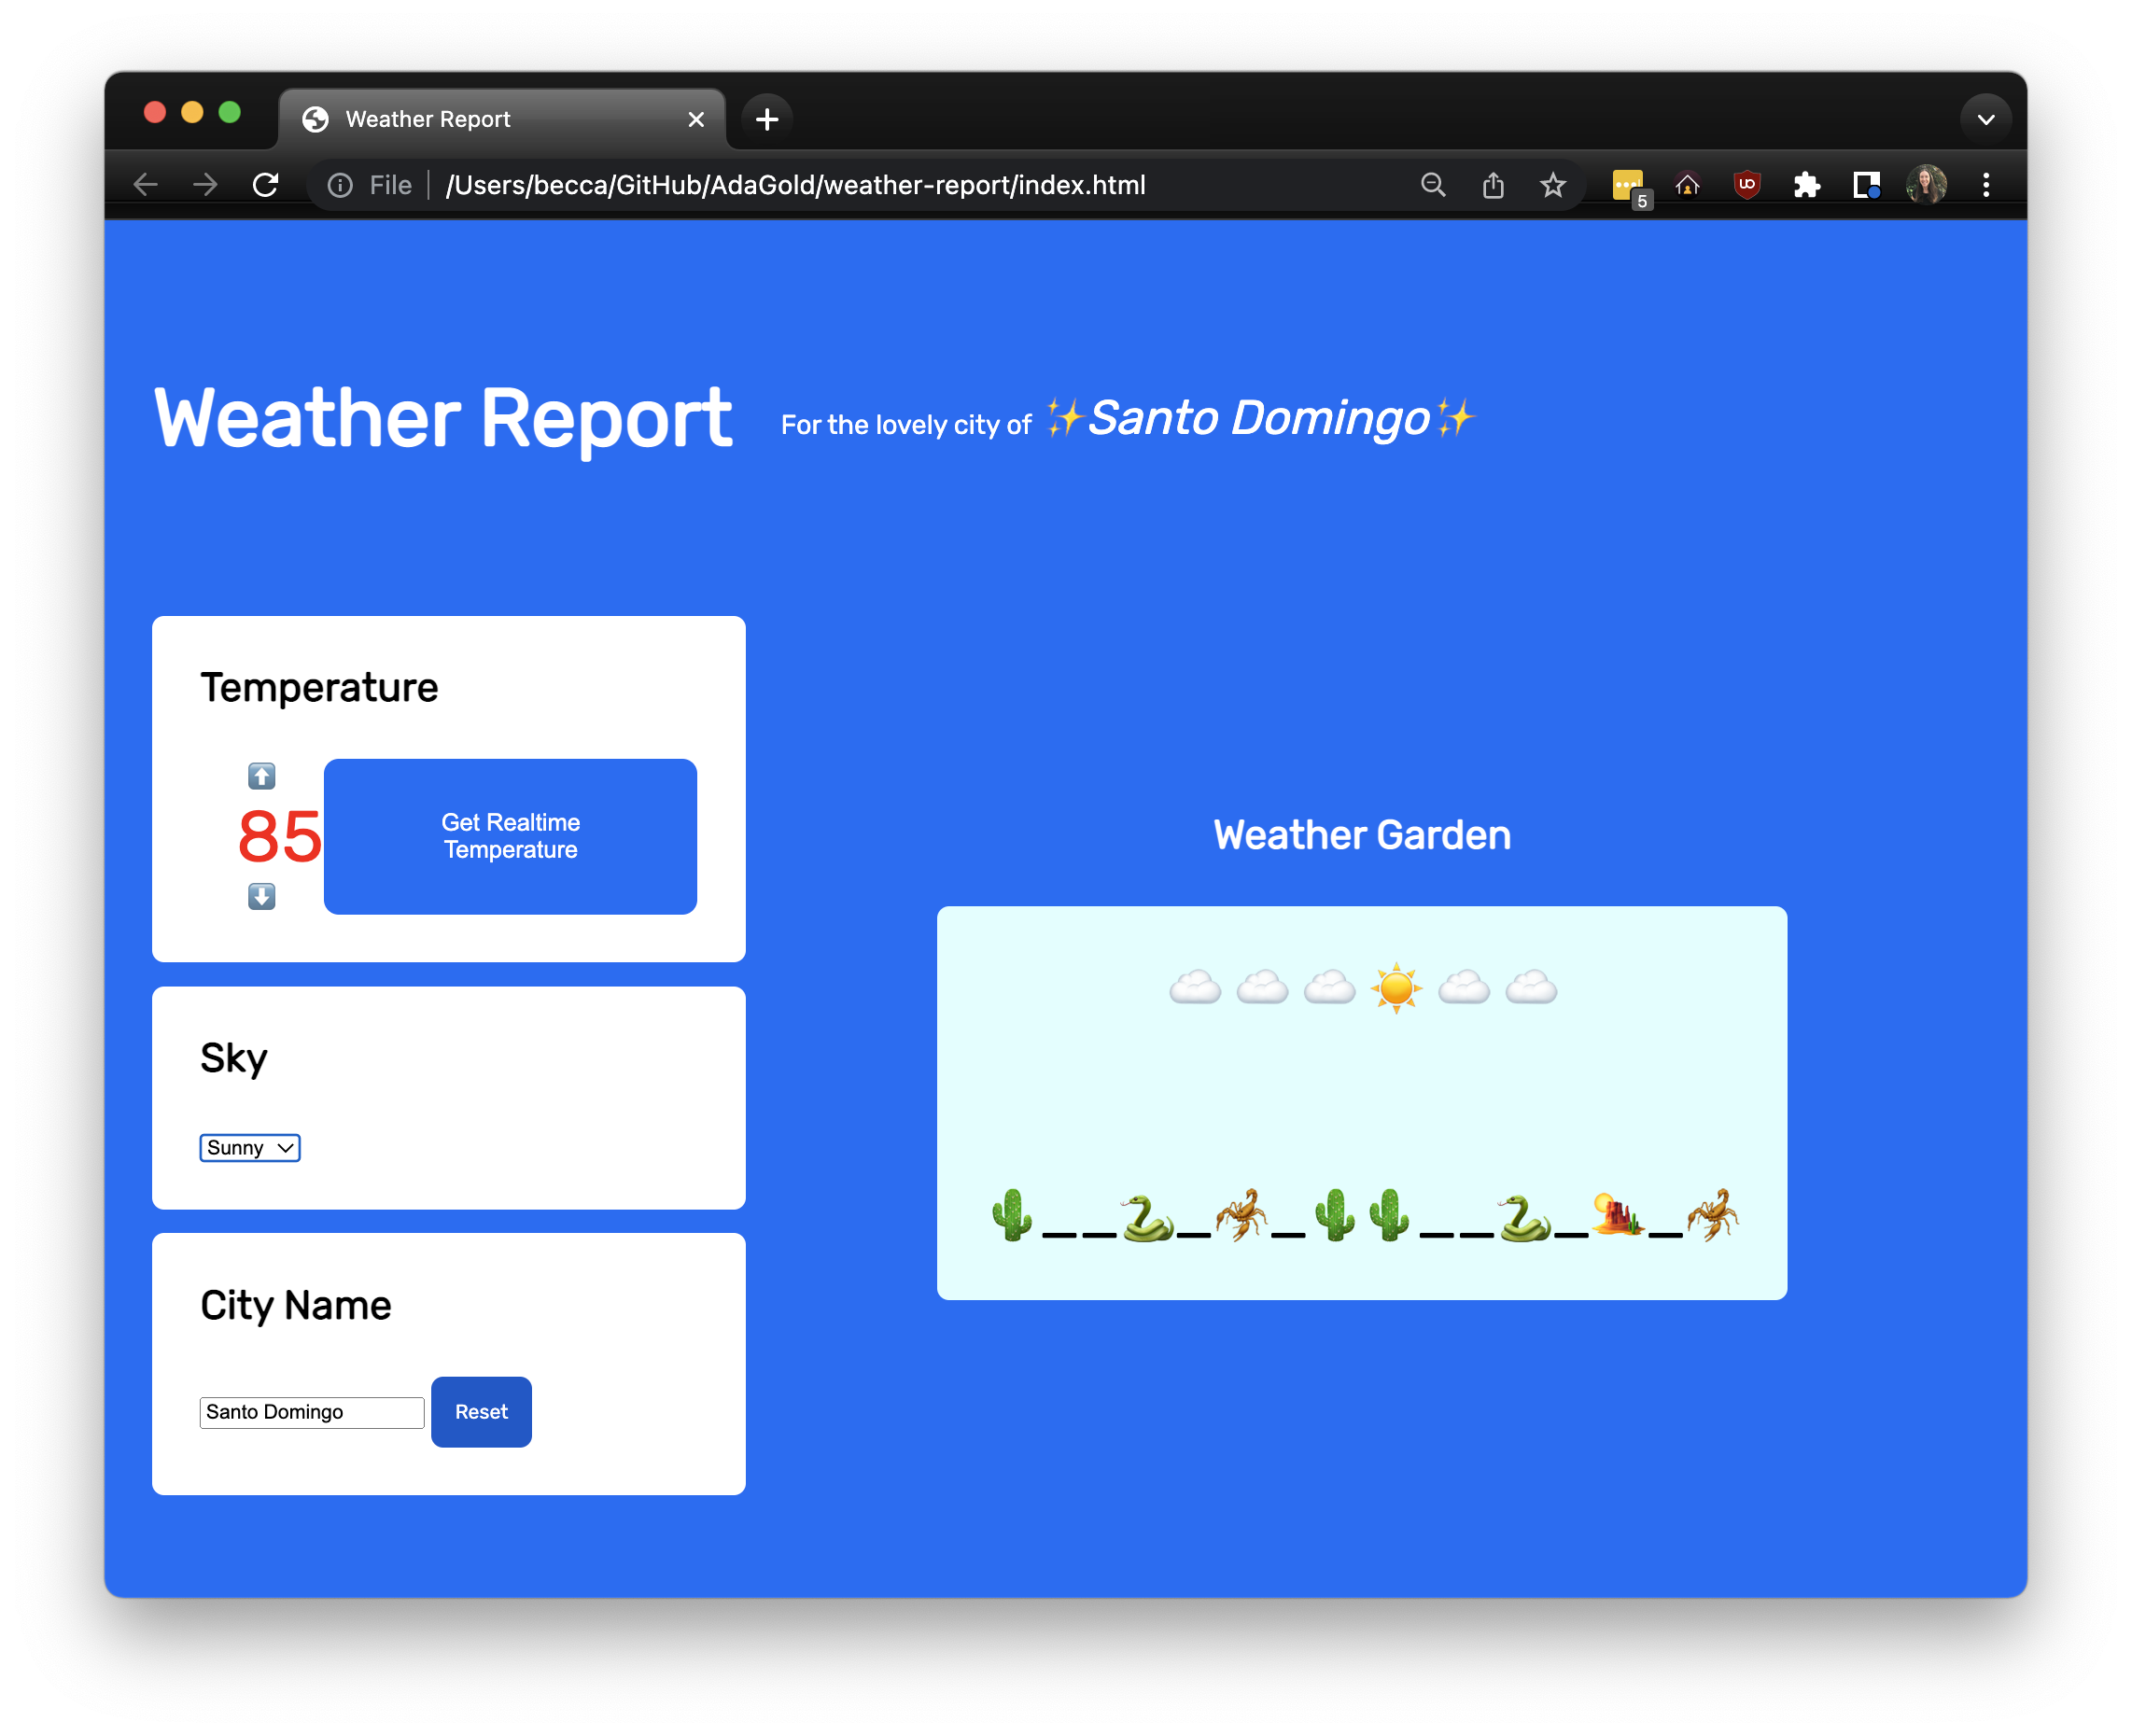 Example weather app: The temperature reads 85, in red text. The selected dropdown for "Sky" is "Sunny." There is a depiction of sunny weather. The city name is "Santo Domingo" The header reads "Santo Domingo."